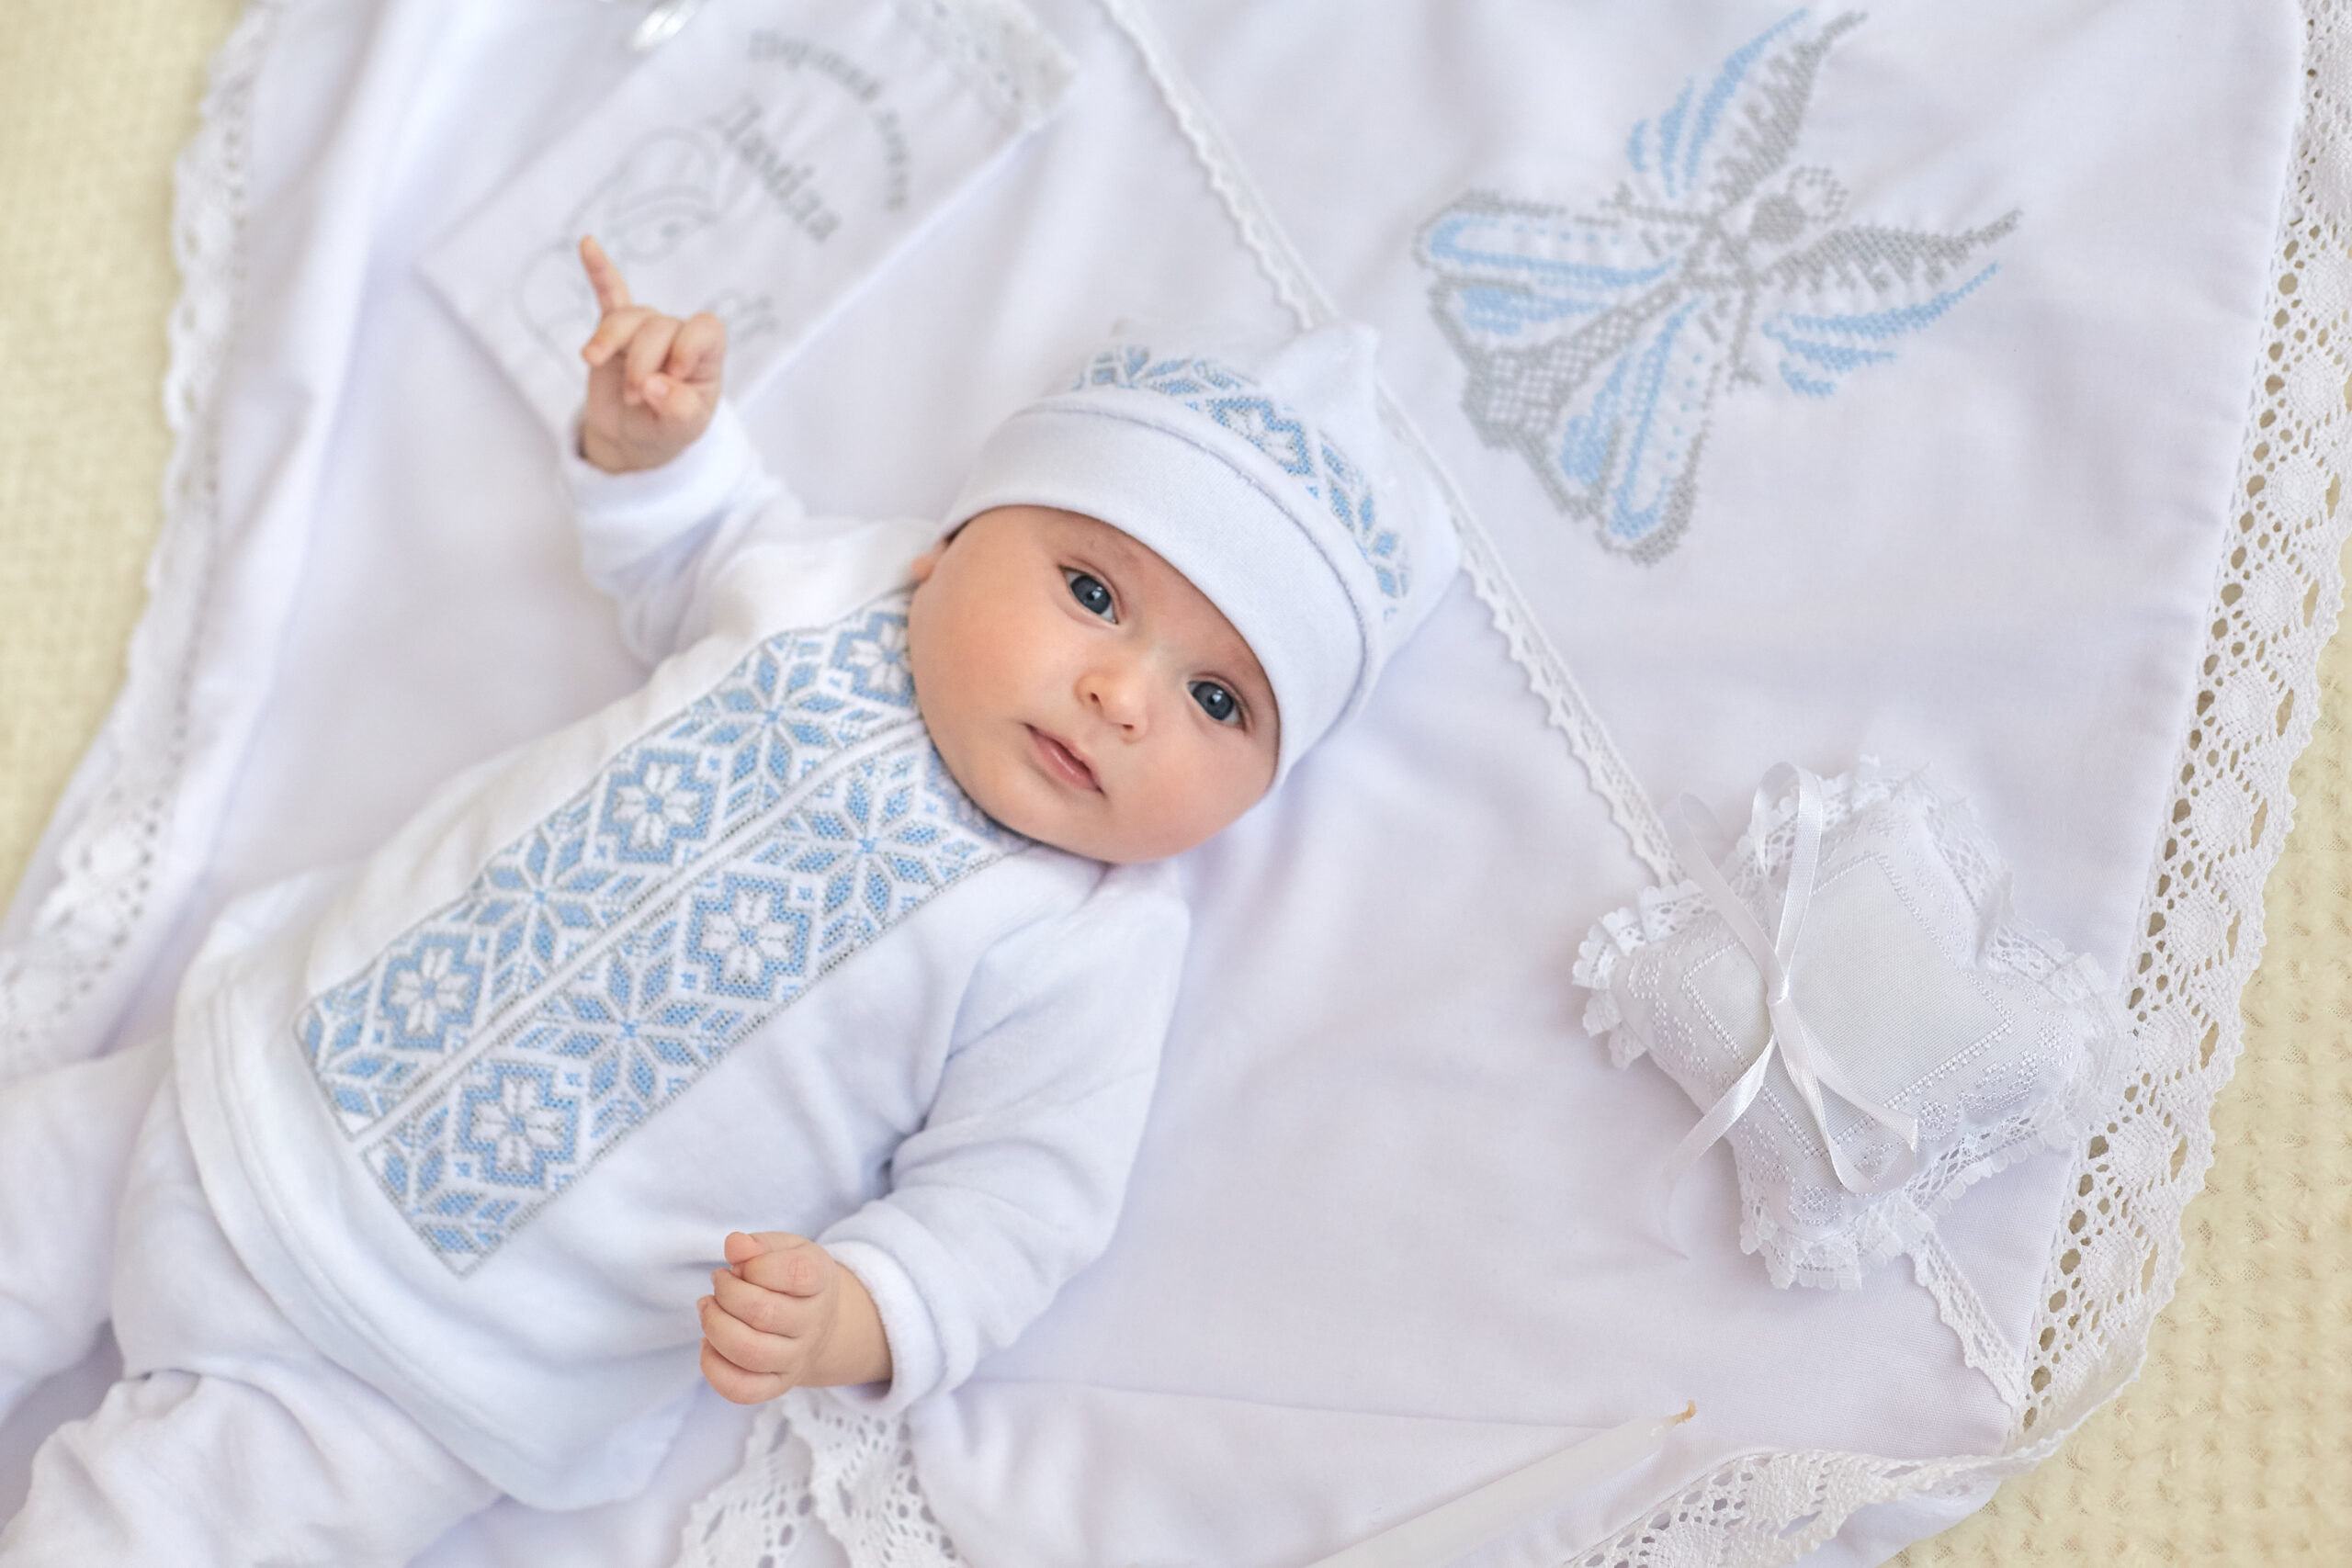 Complete set for baptism of a boy “Big stars” silver and blue, velour